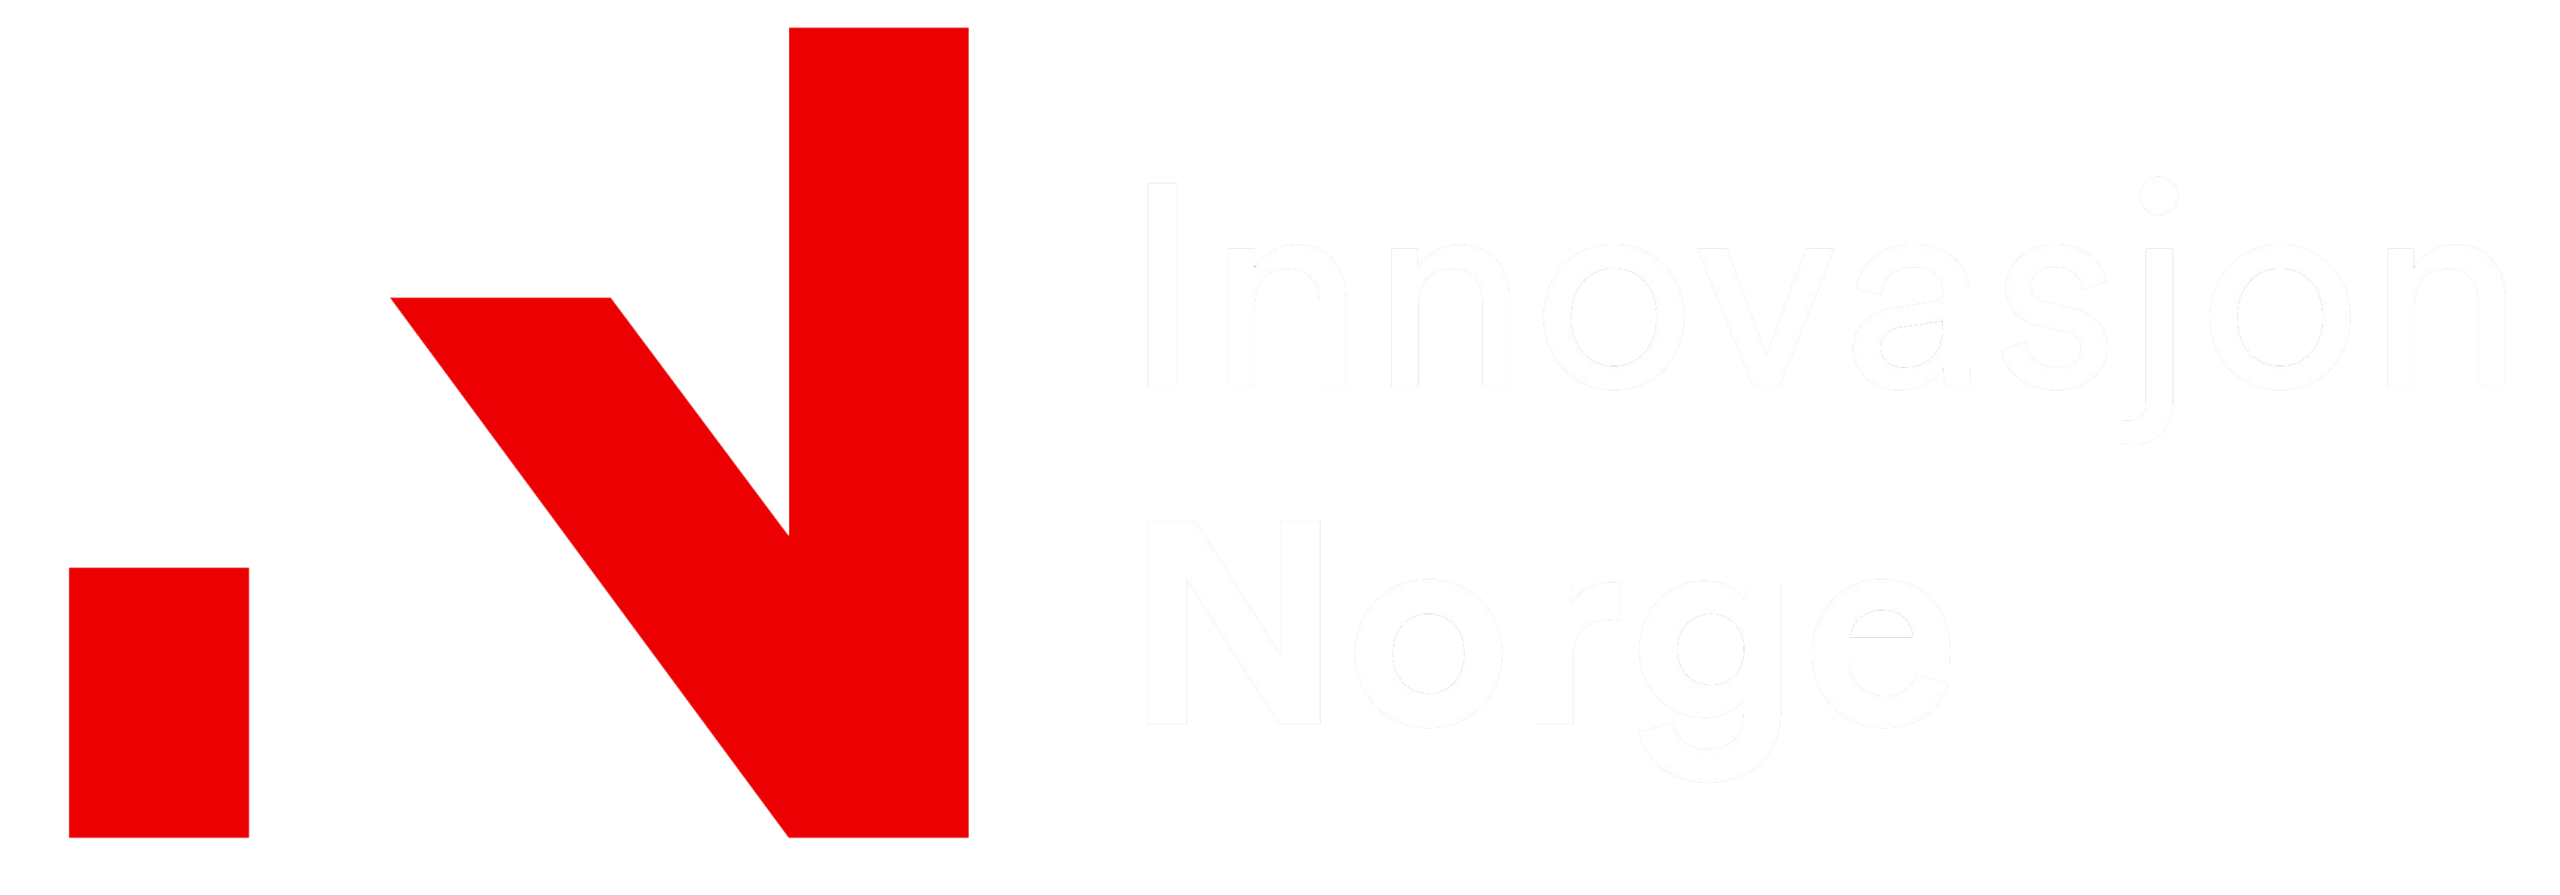 With support from Innovasjon Norge